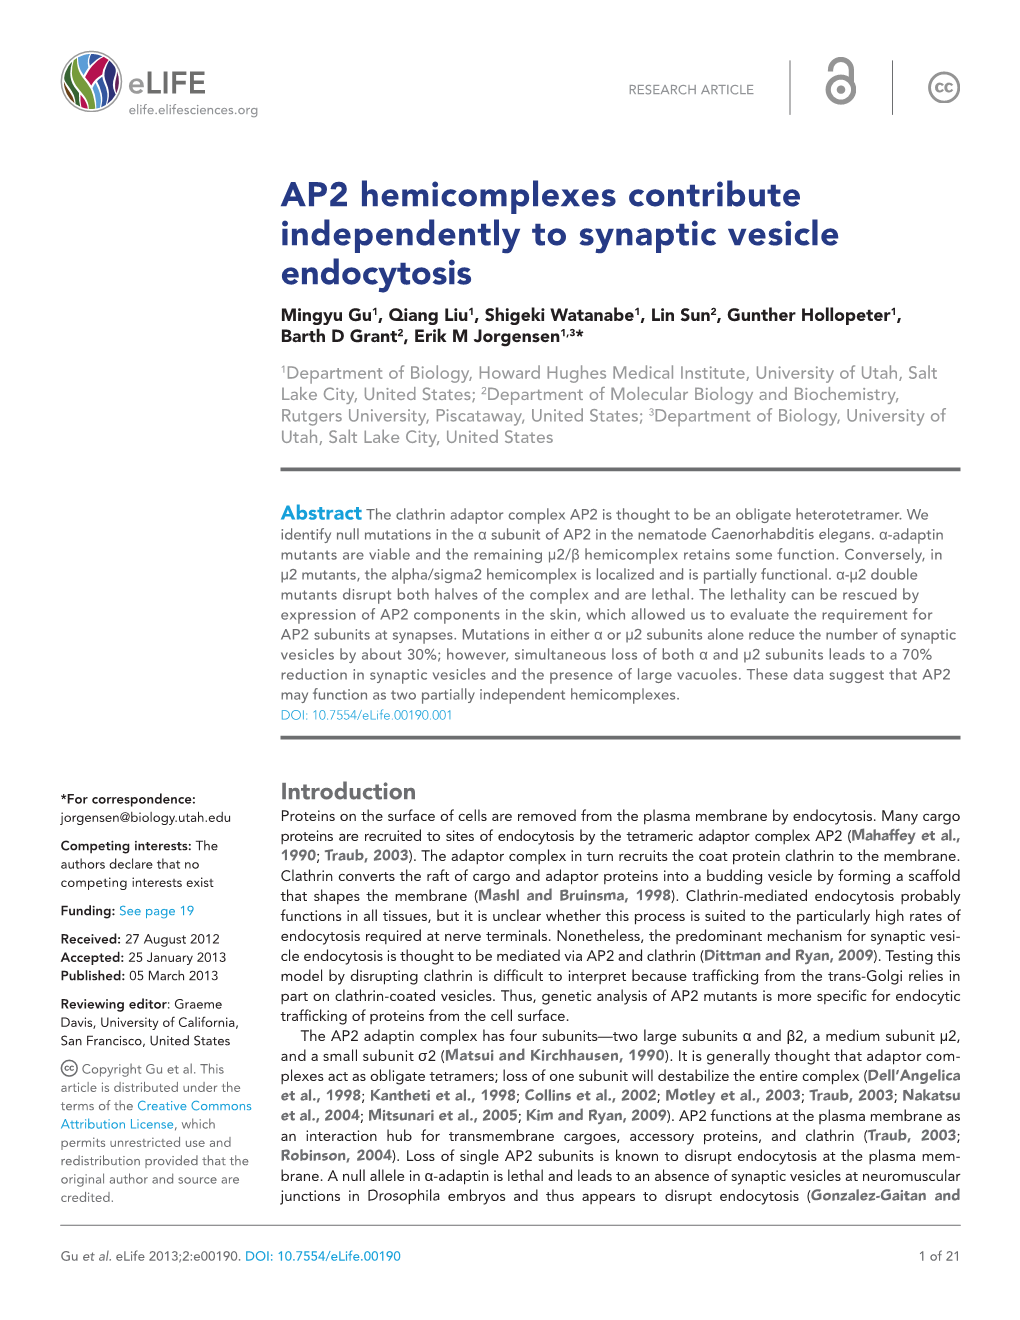 AP2 Hemicomplexes Contribute Independently to Synaptic Vesicle Endocytosis